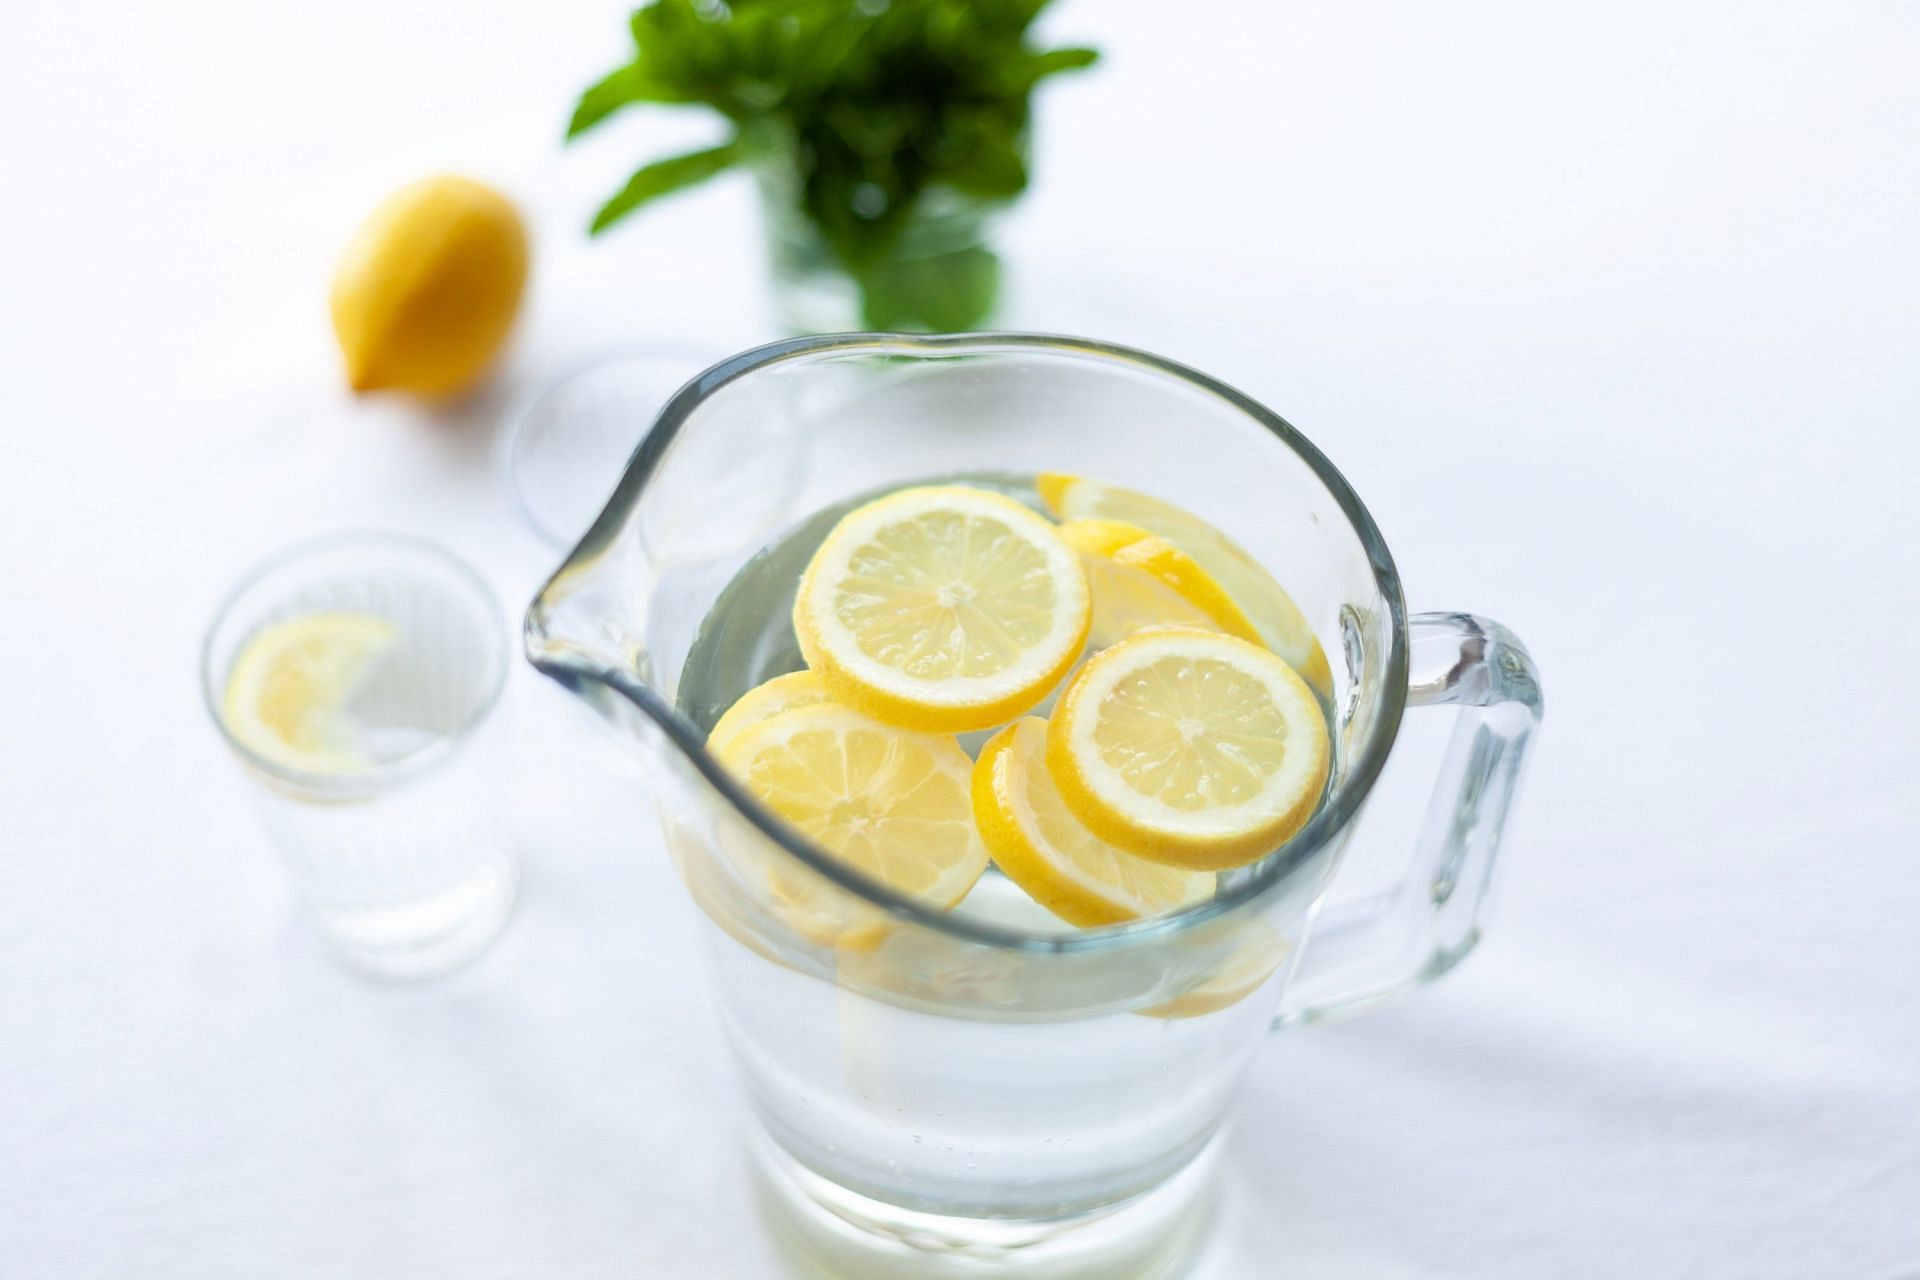 Lemon water helps you lose weight and is a rich source of powerful antioxidants. (Image via Pexels/ Julia Zolotova)